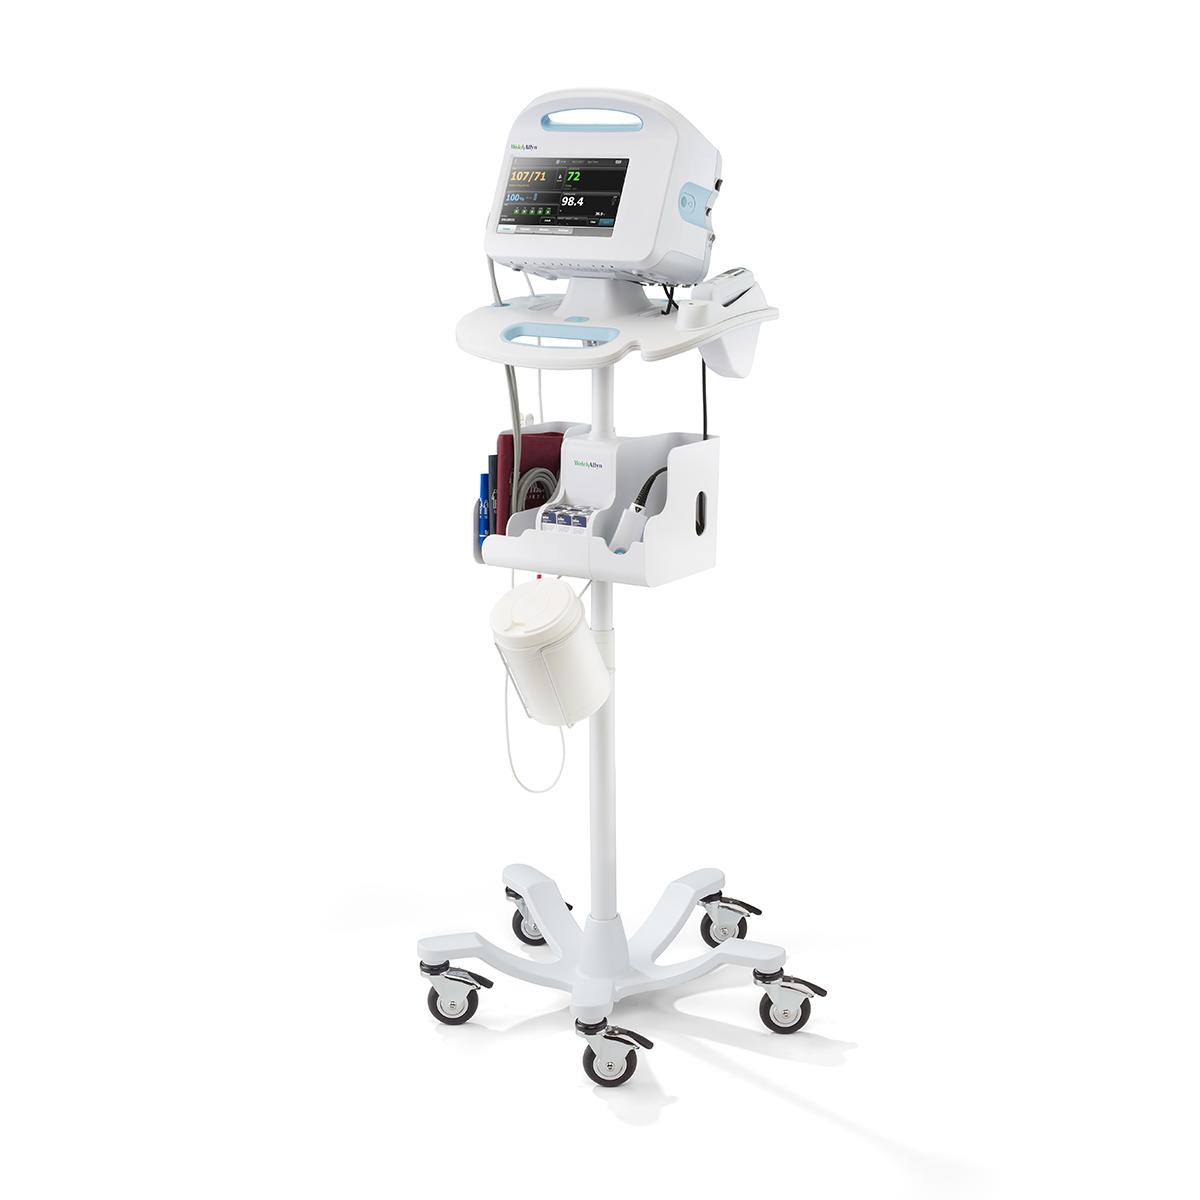 Welch Allyn Connex 6700 Series Vital Signs Monitor with Masimo SpO2 and Braun ThermoScan PRO 6000